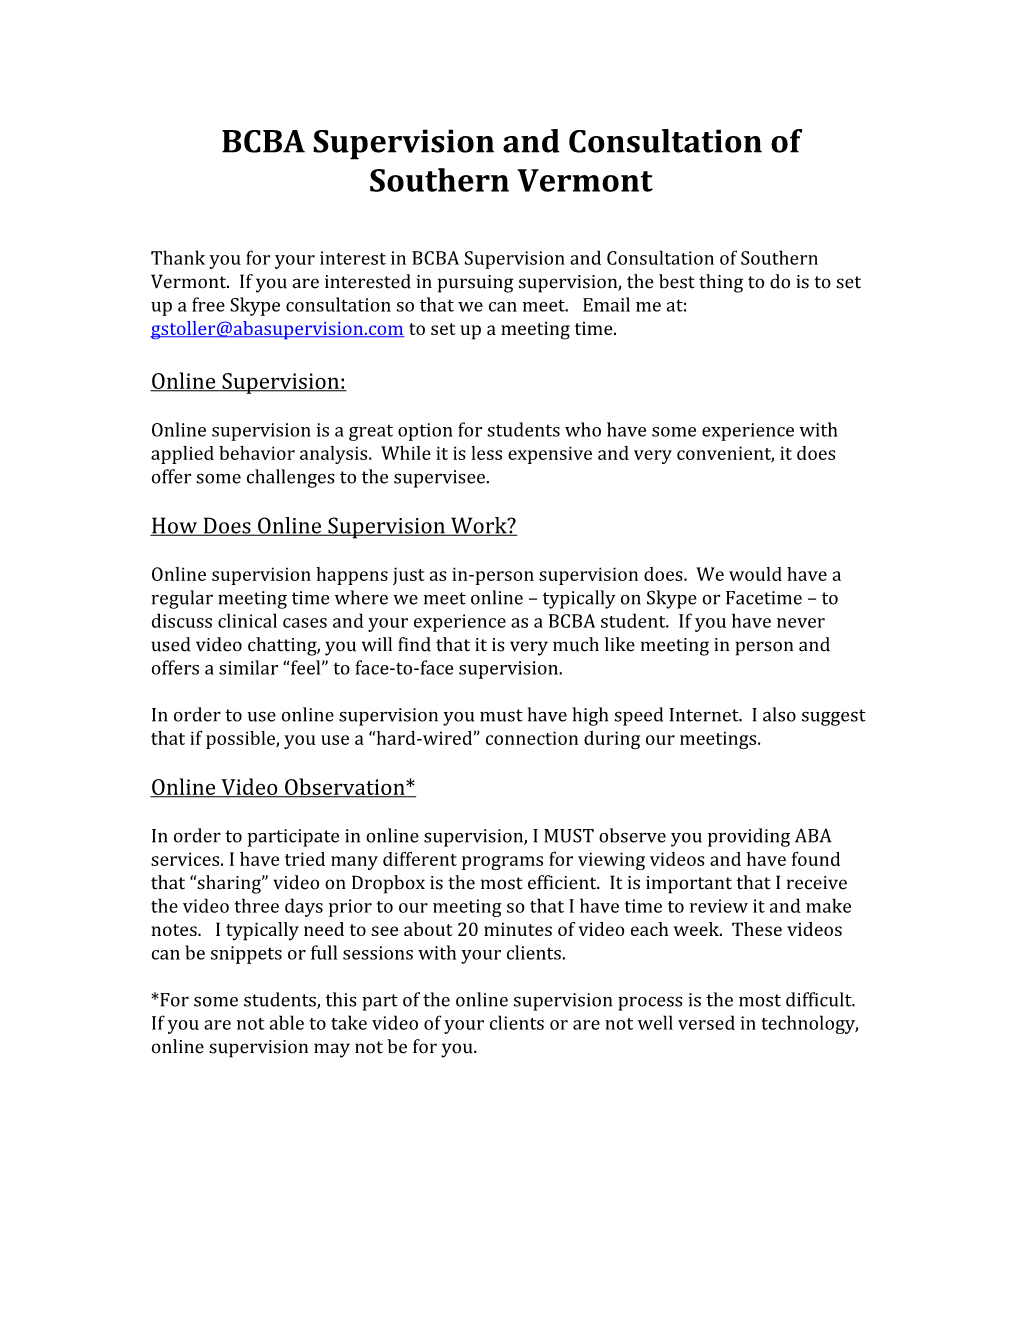 BCBA Supervision and Consultation of Southern Vermont